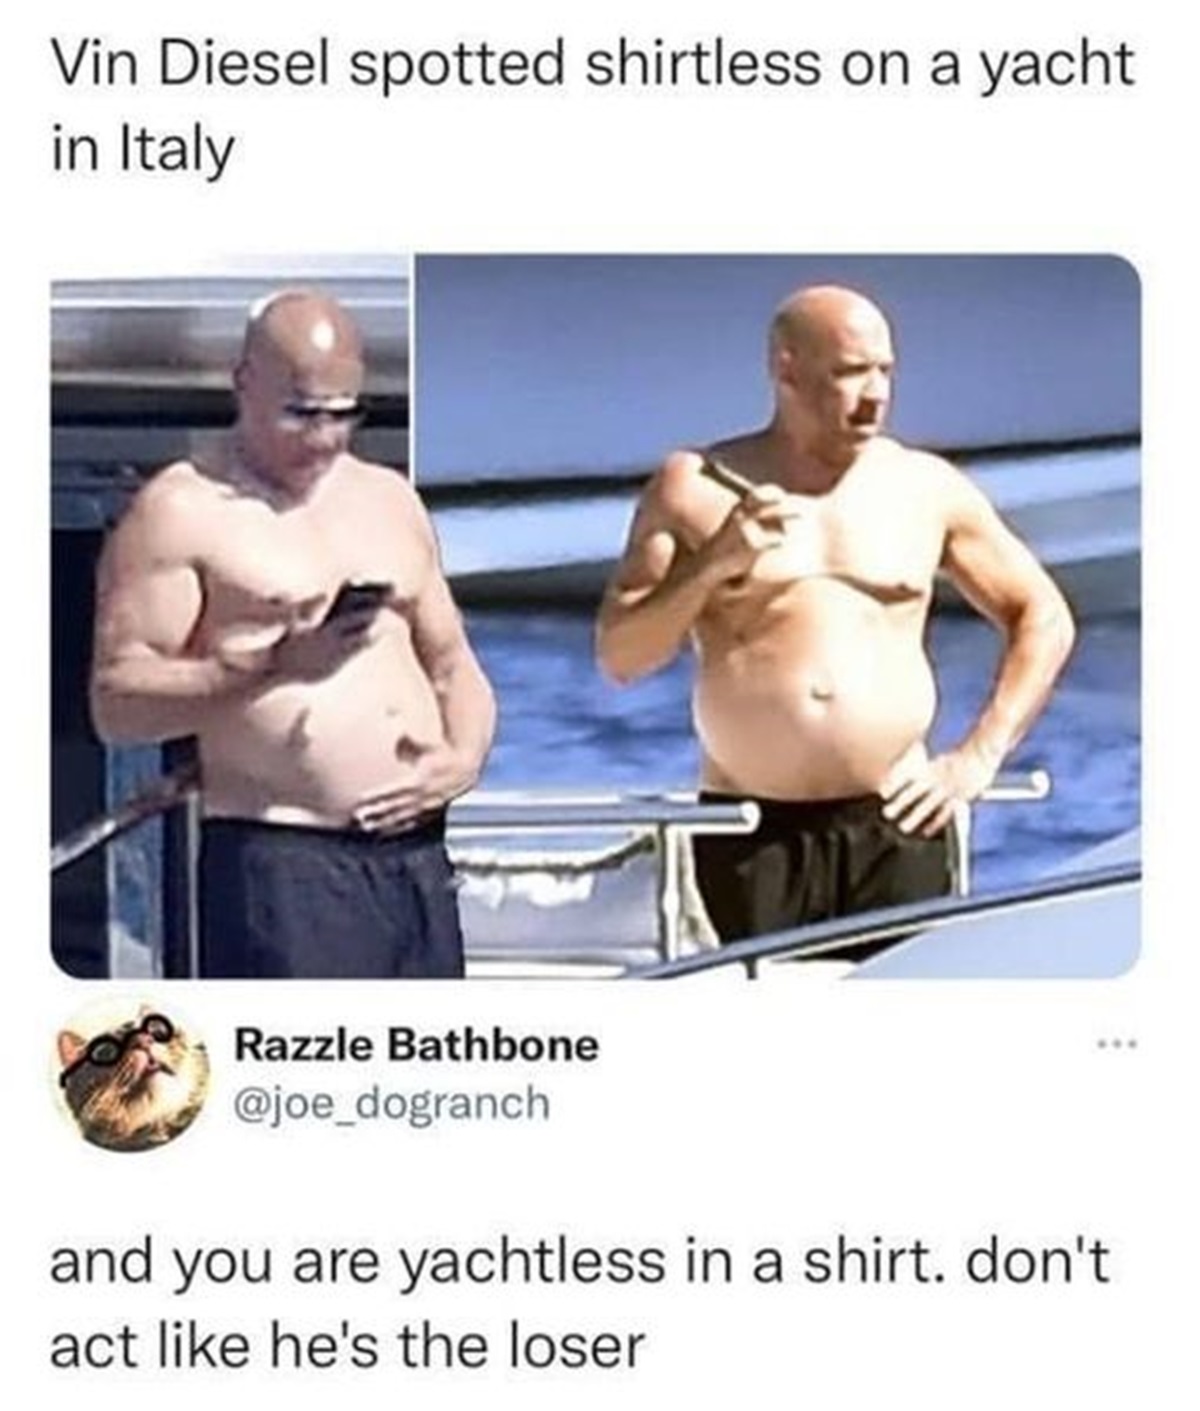 vin diesel on a yacht meme - Vin Diesel spotted shirtless on a yacht in Italy Razzle Bathbone and you are yachtless in a shirt. don't act he's the loser